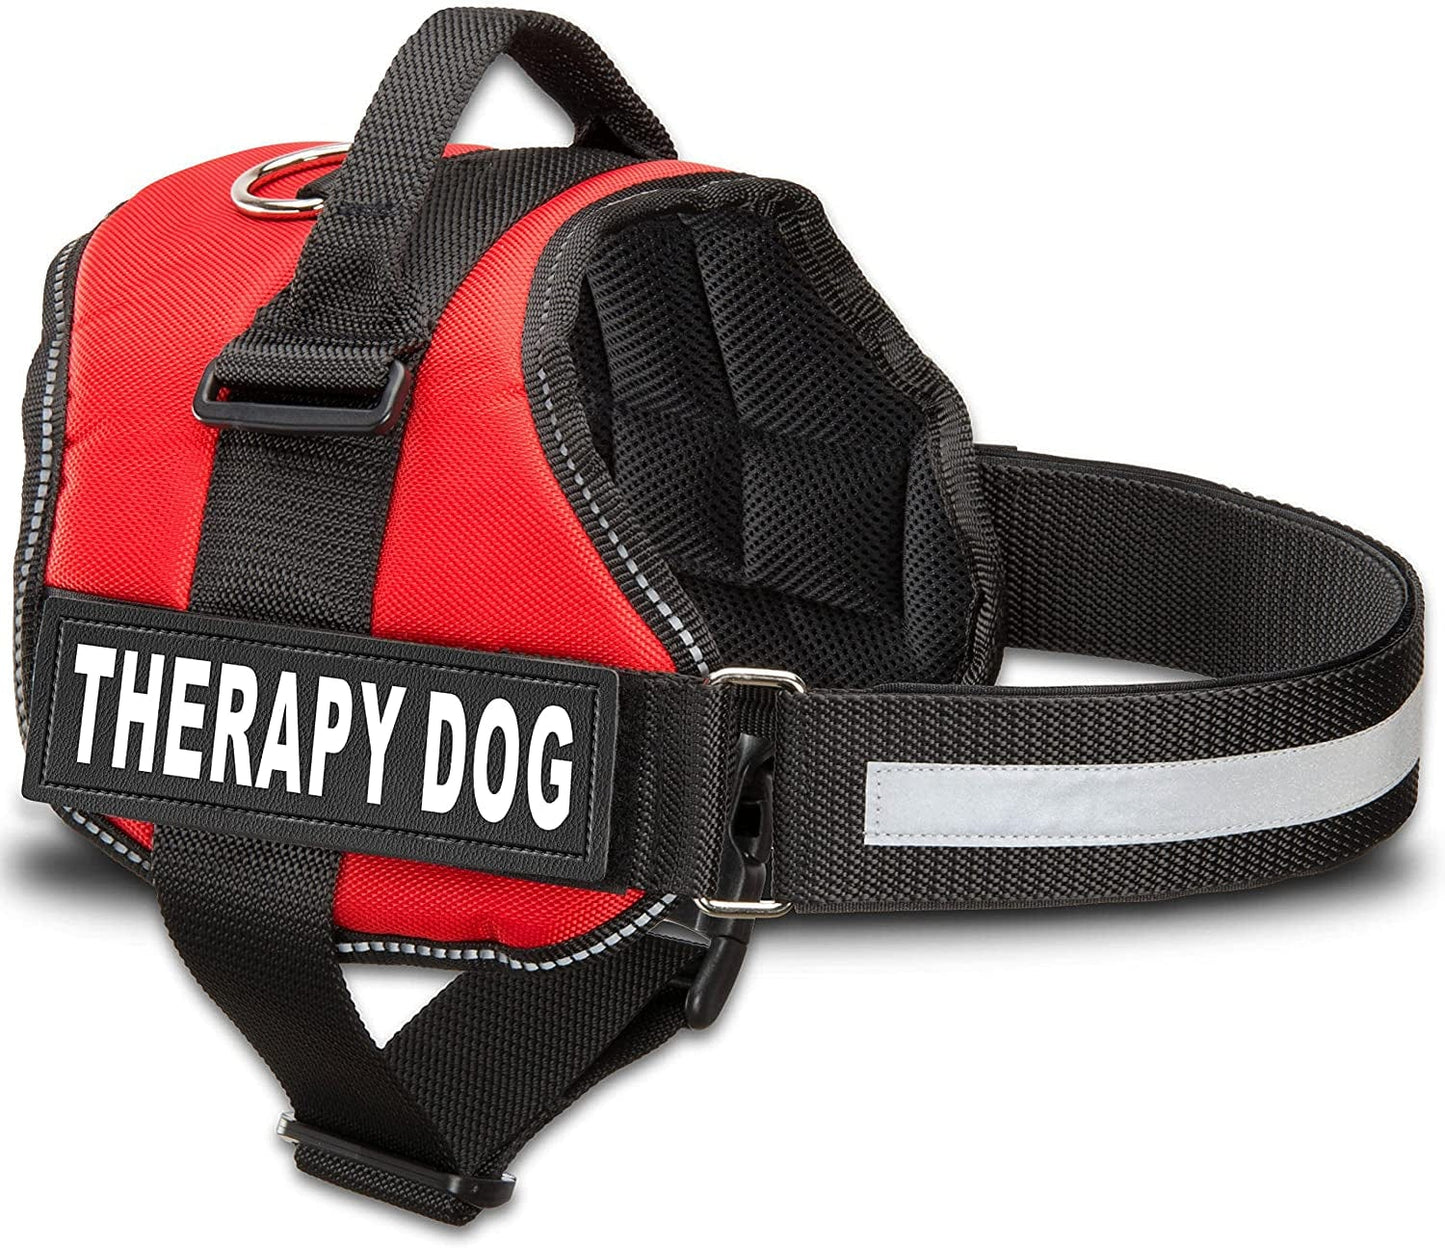 Therapy Dog Vest Harness with Hook and Loop Straps and Handle - Harnesses in 7 Sizes from XXS to XXL - Therapy Dog in Training Vest Features Reflective Therapy Dog Patch Animals & Pet Supplies > Pet Supplies > Dog Supplies > Dog Apparel Industrial Puppy Red Large, Fits Girth 27-33.5" 